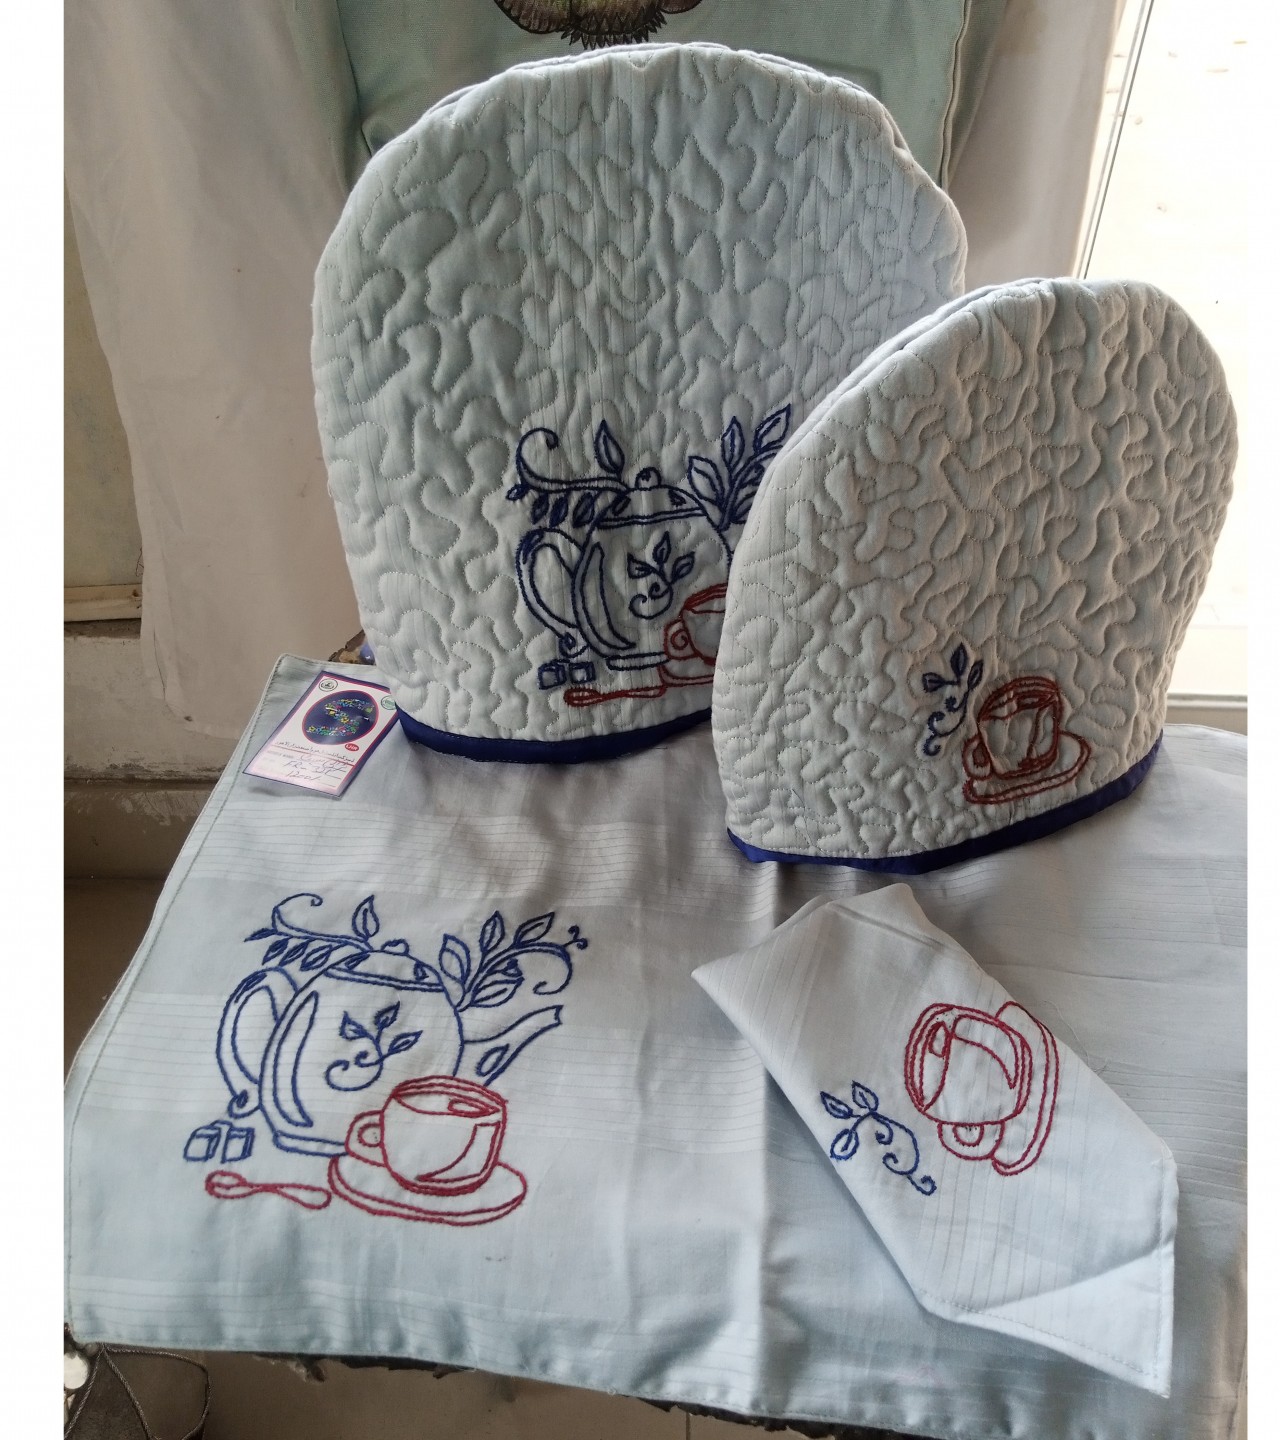 embroidered trolley runners with tikozi and mikozi